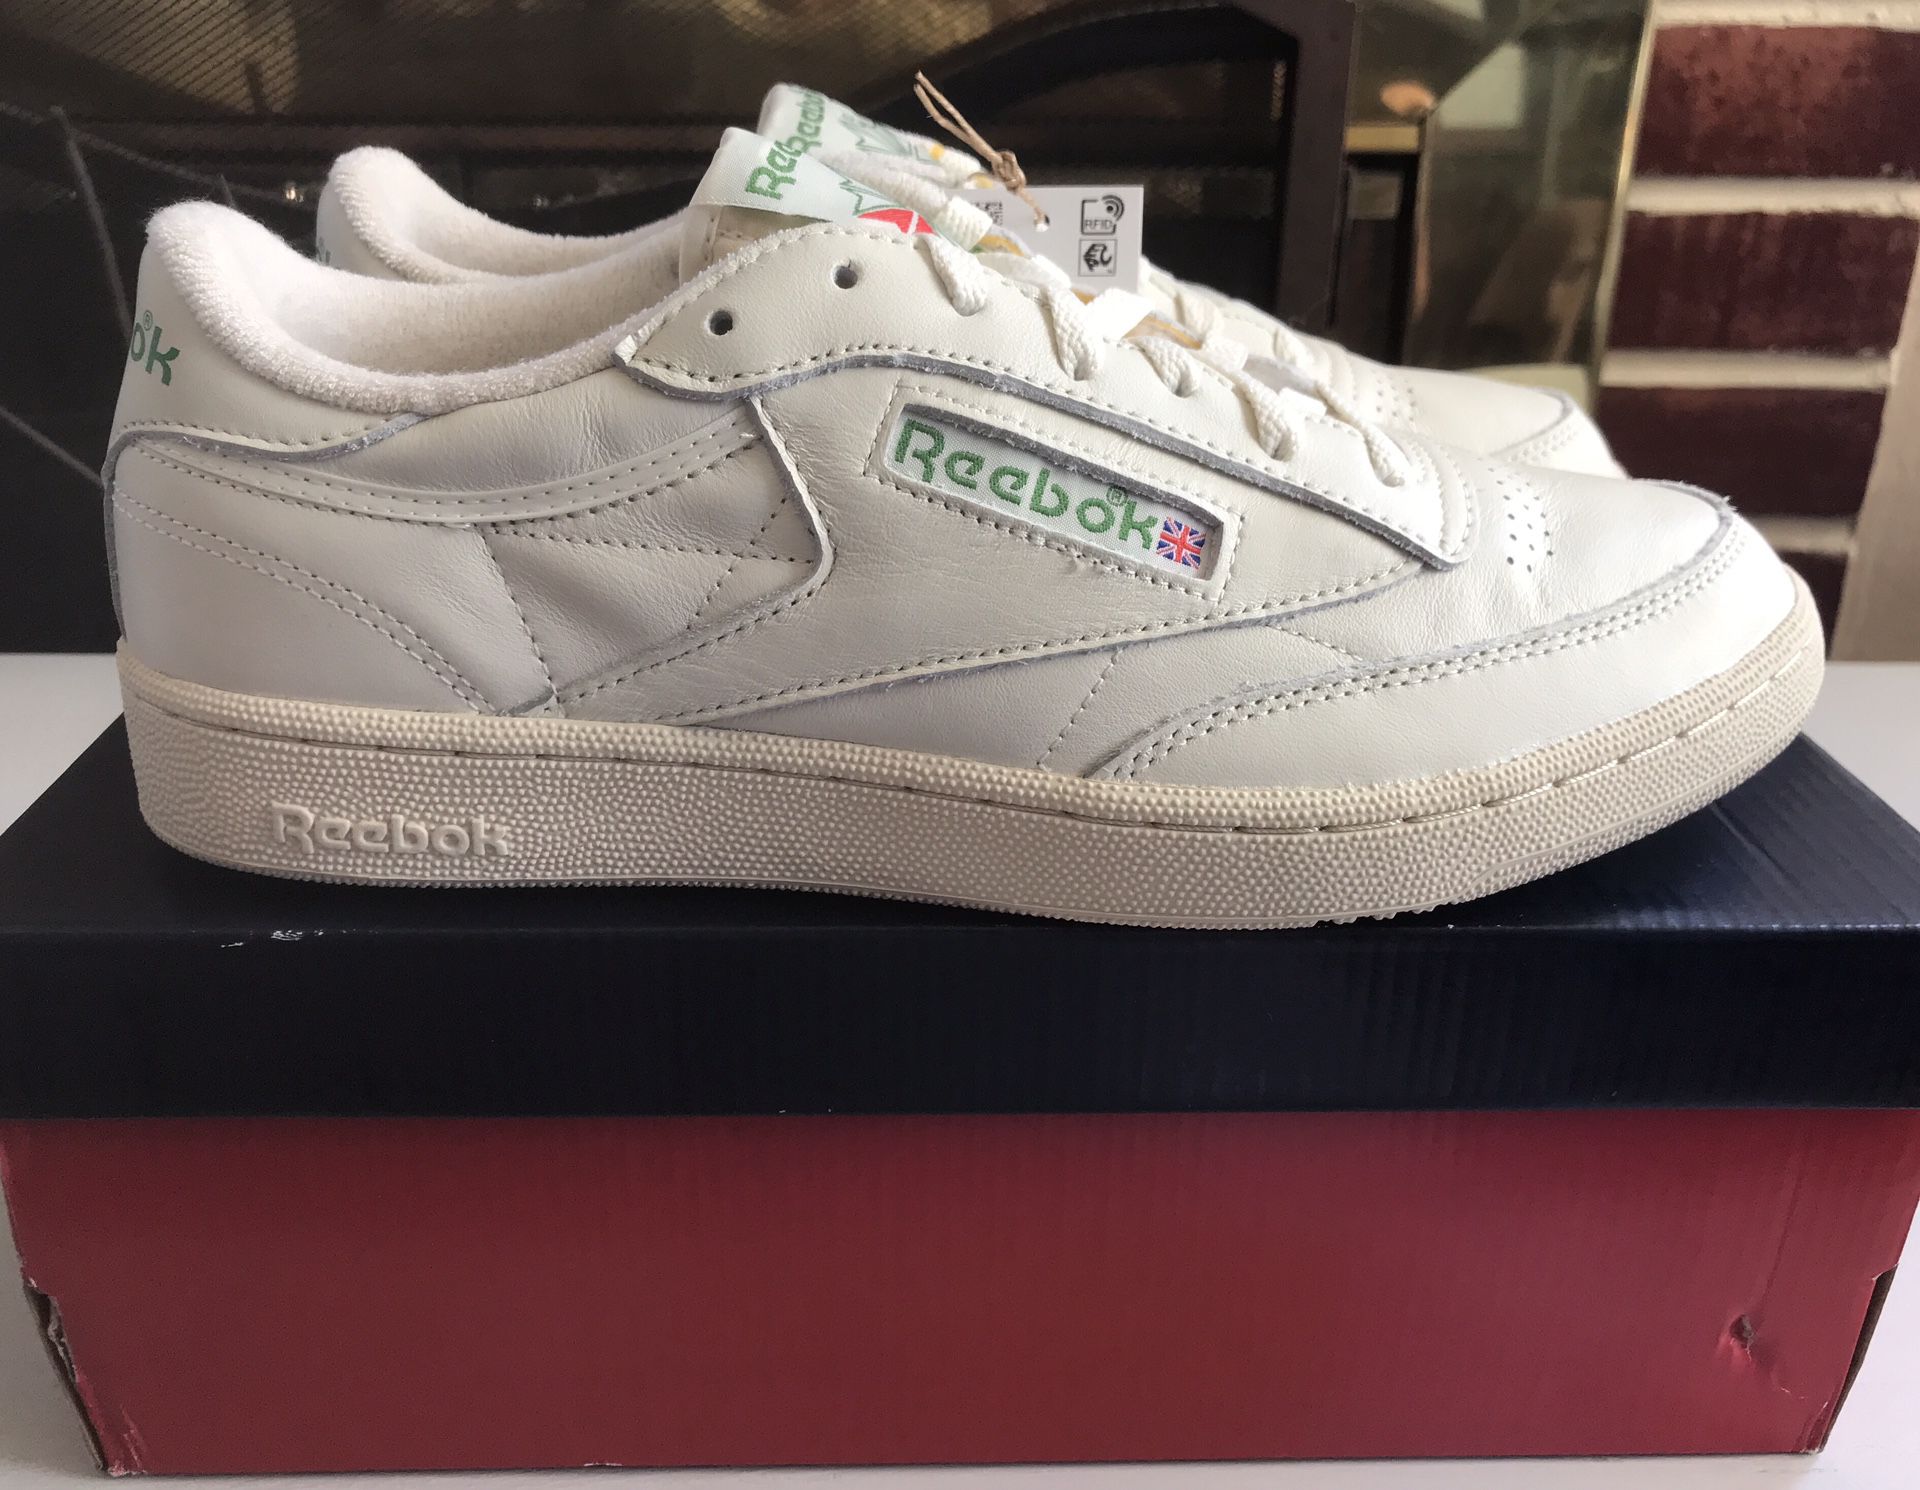 Tag fat glans frekvens (NEW) (1 AVAILABLE) MEN'S REEBOK CLUB C 85 VINTAGE SNEAKERS - SIZE: 10  (MSRP: $85) for Sale in Compton, CA - OfferUp